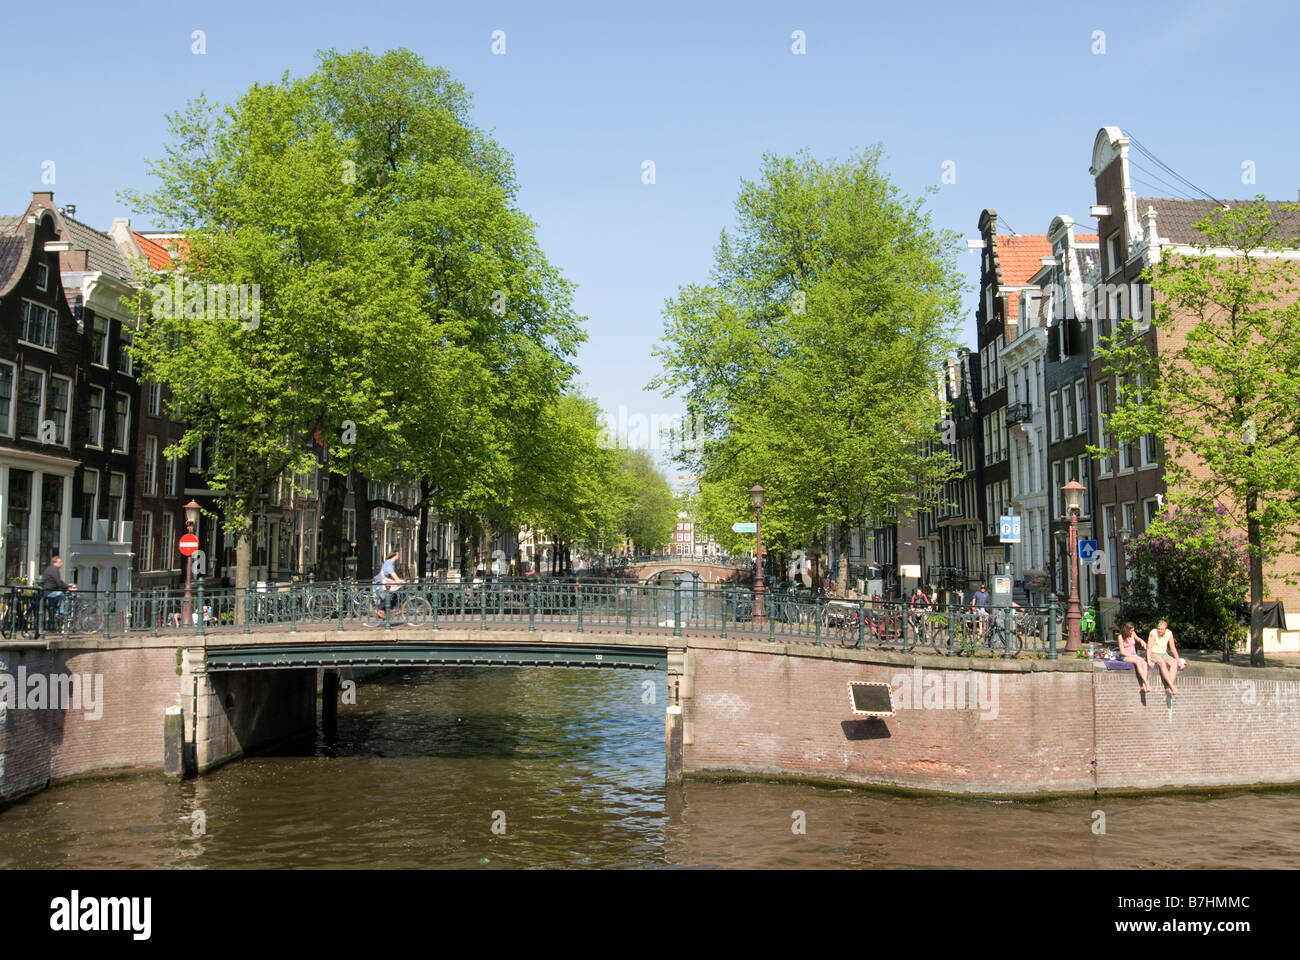 A canal bridge in Amsterdam, The Netherlands Stock Photo